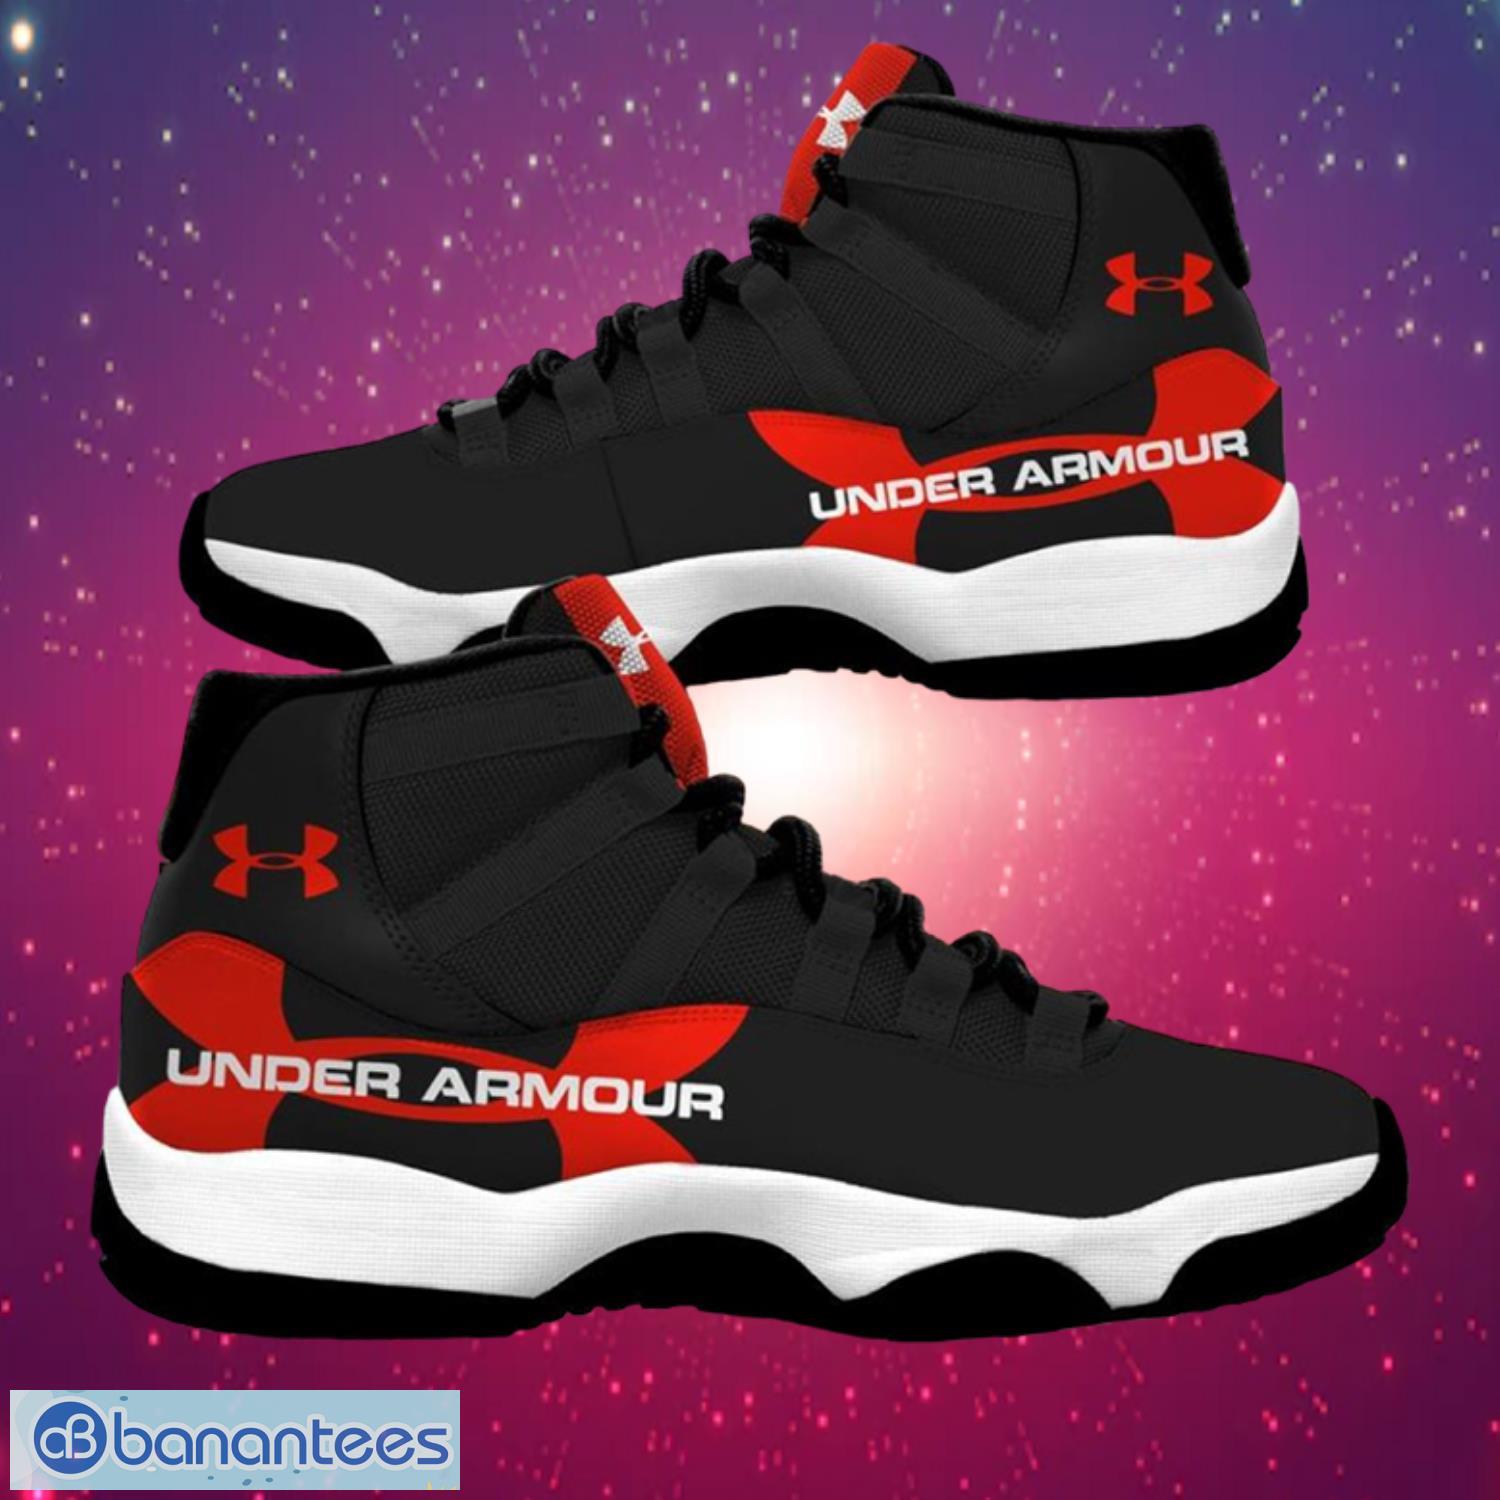 Under Armour Red Black Dark Style Air Jordan 11 Shoes Product Photo 1